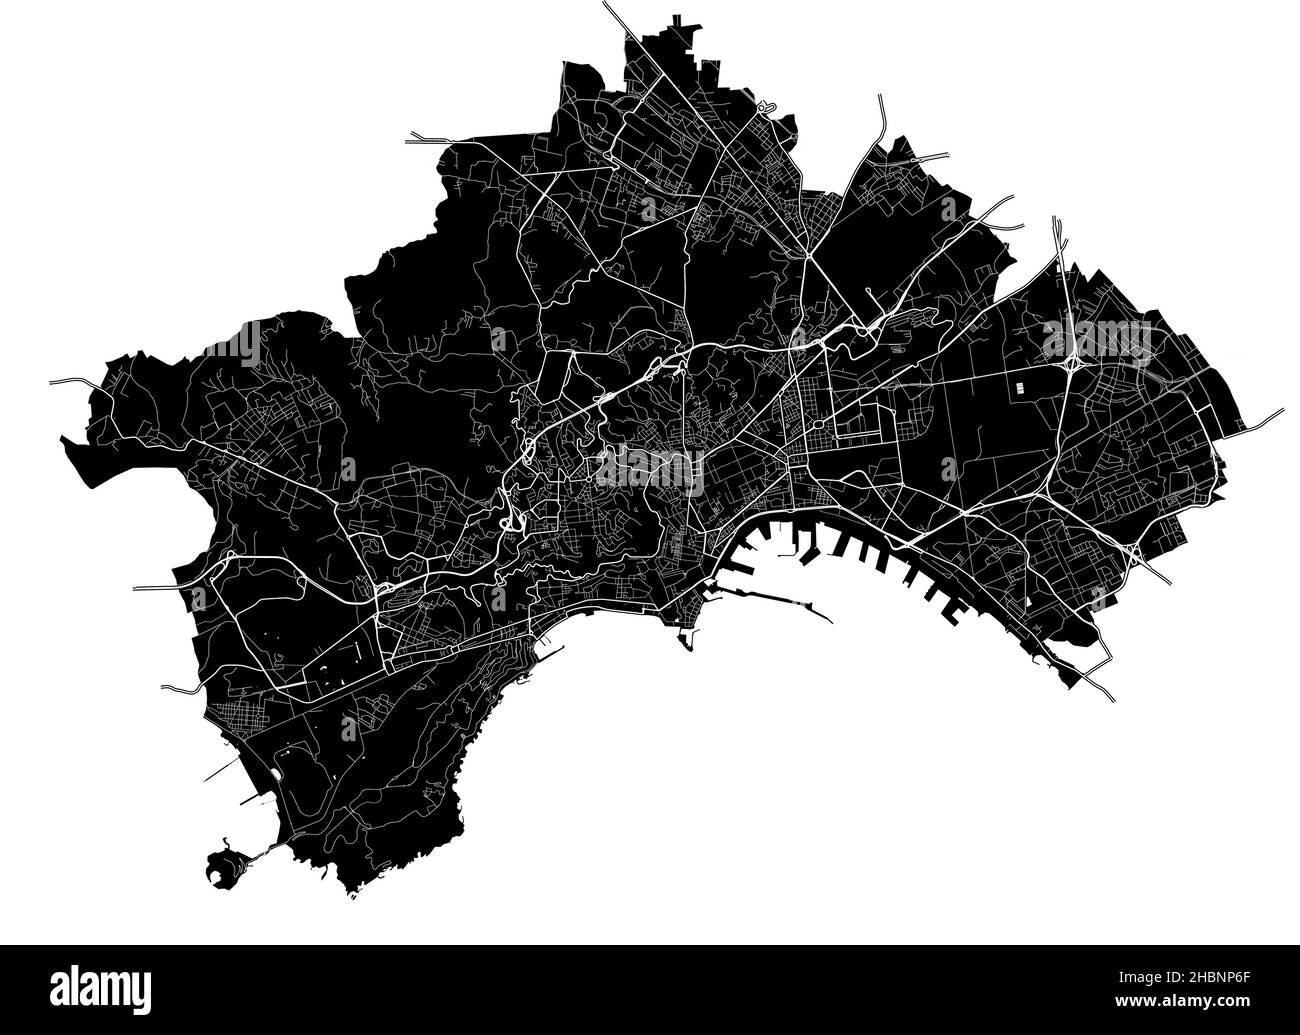 Naples, Italy, high resolution vector map with city boundaries, and editable paths. The city map was drawn with white areas and lines for main roads, Stock Vector